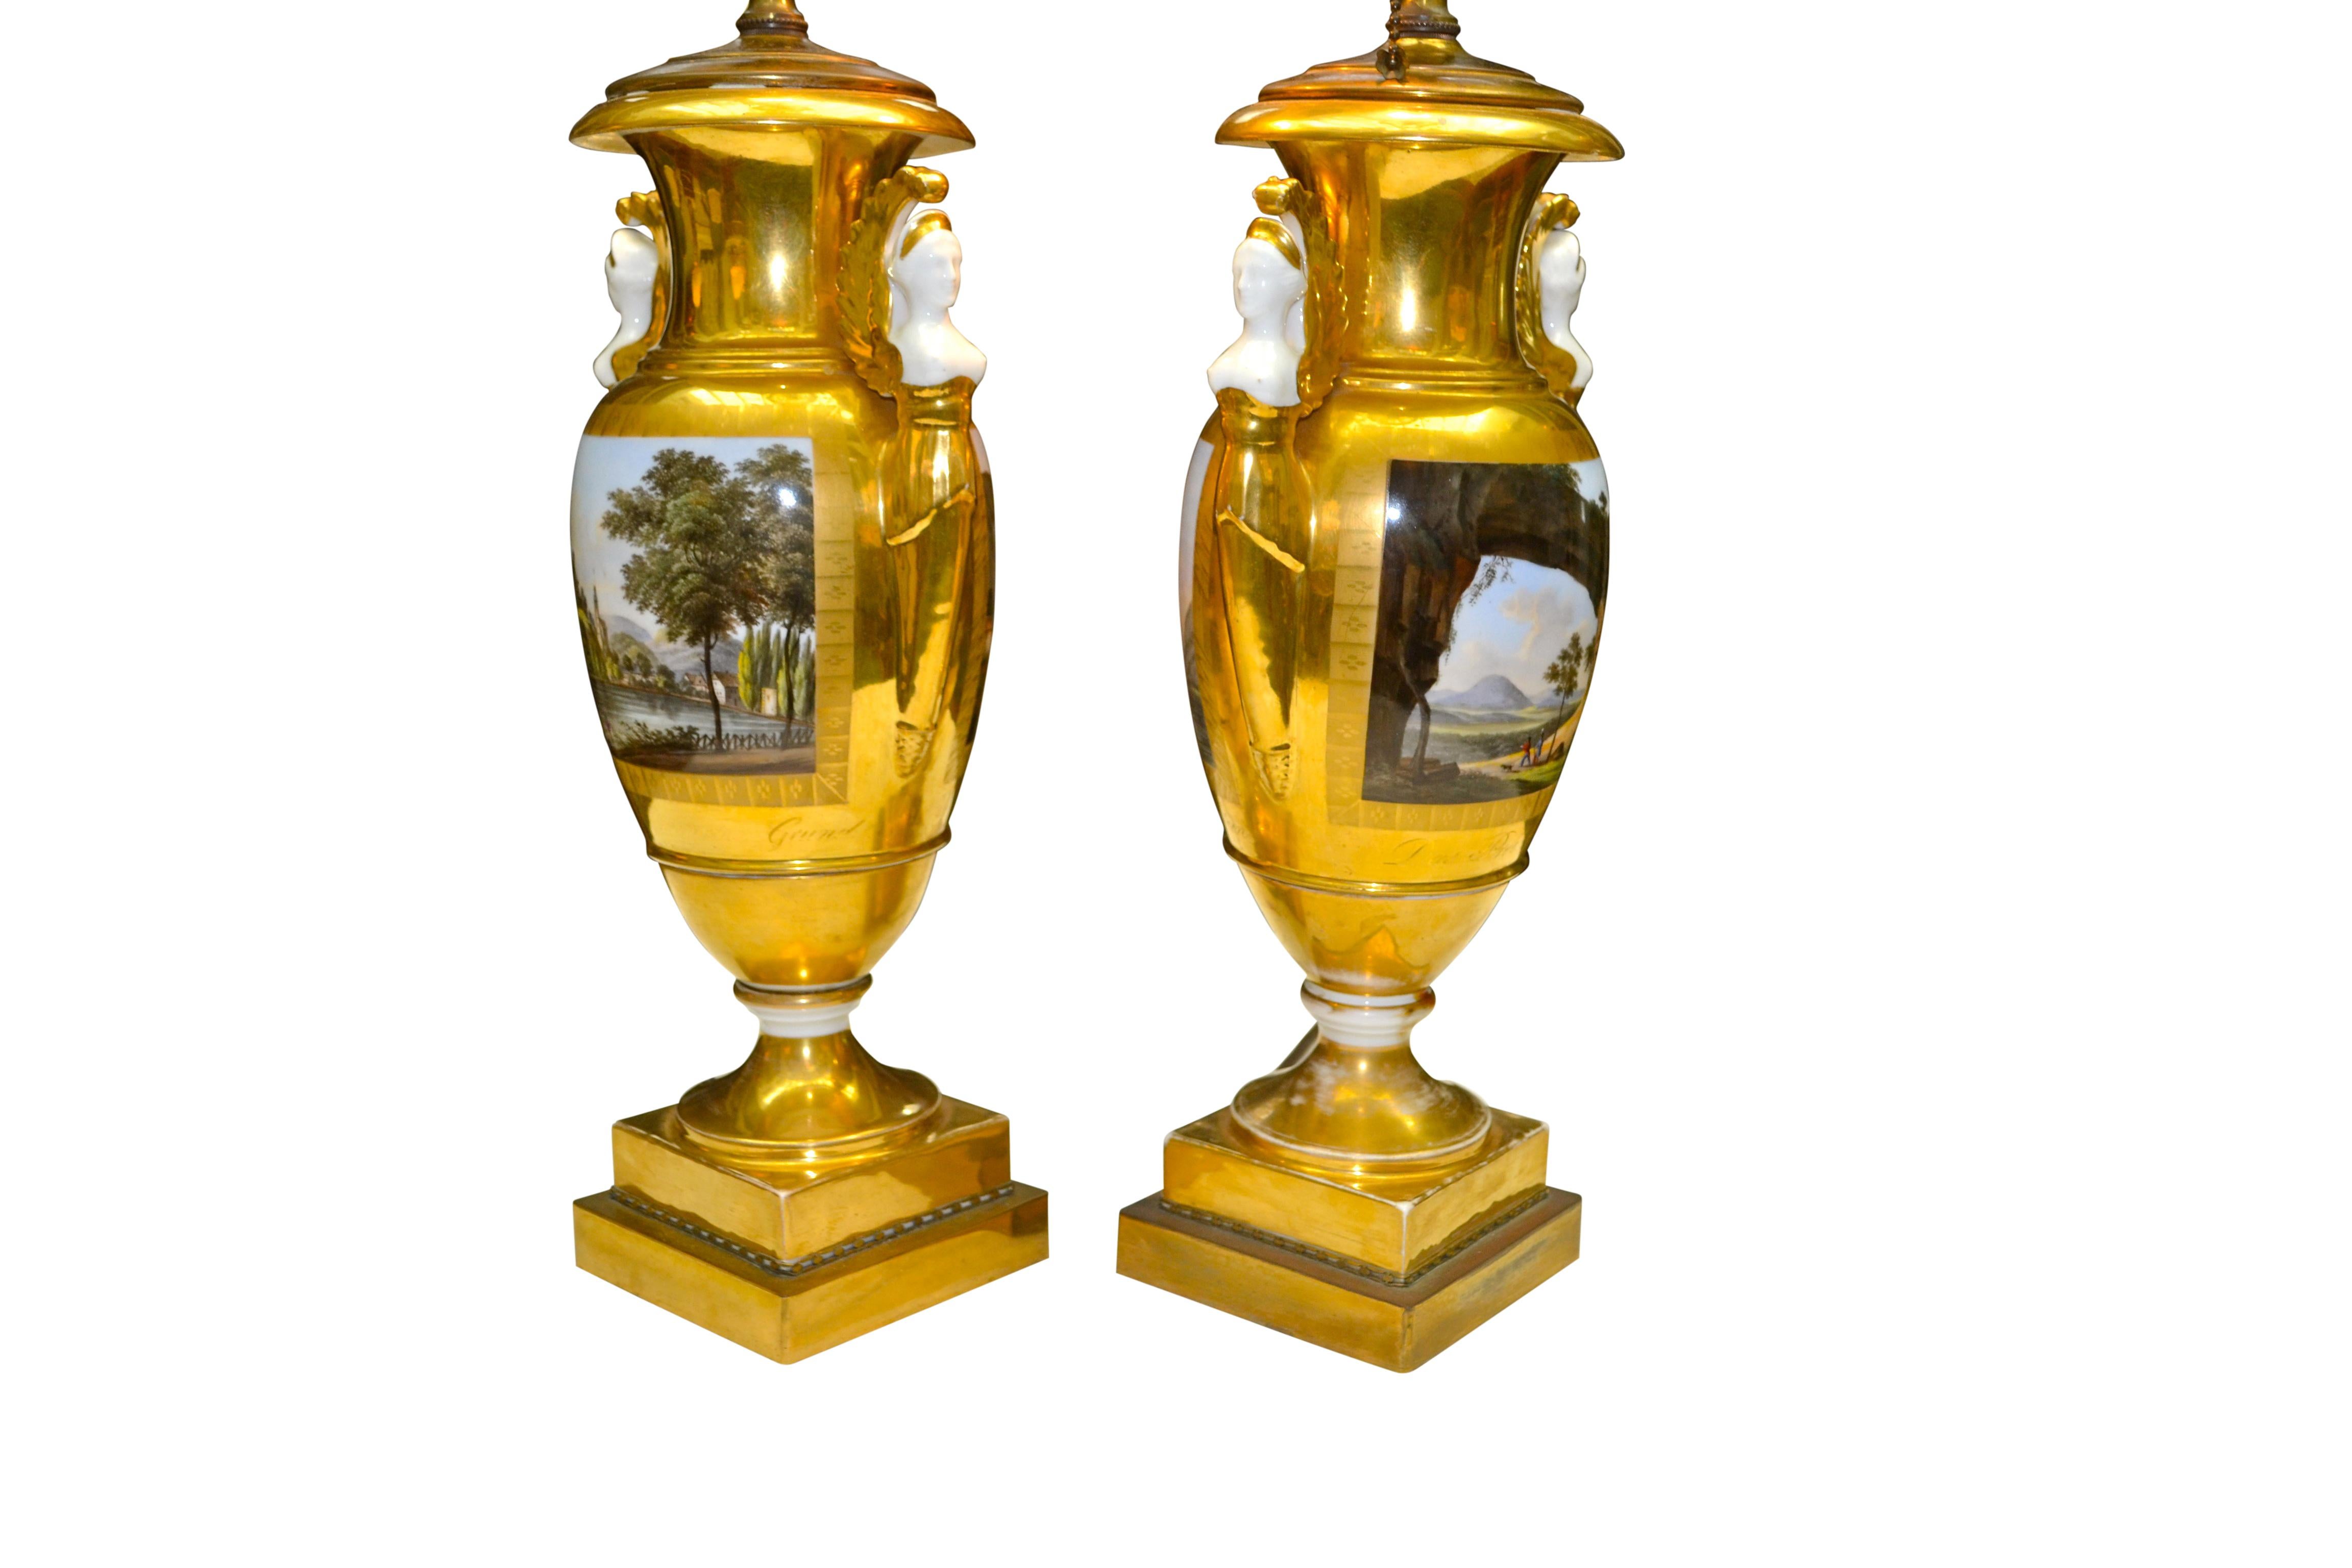 The twin handled urn shaped porcelain body is entirely gilded with matte and burnished gold. Each partially gilded upper ‘handle’ is in the shape of a winged classical female torso. The urns are painted on each side with familiar German landscapes